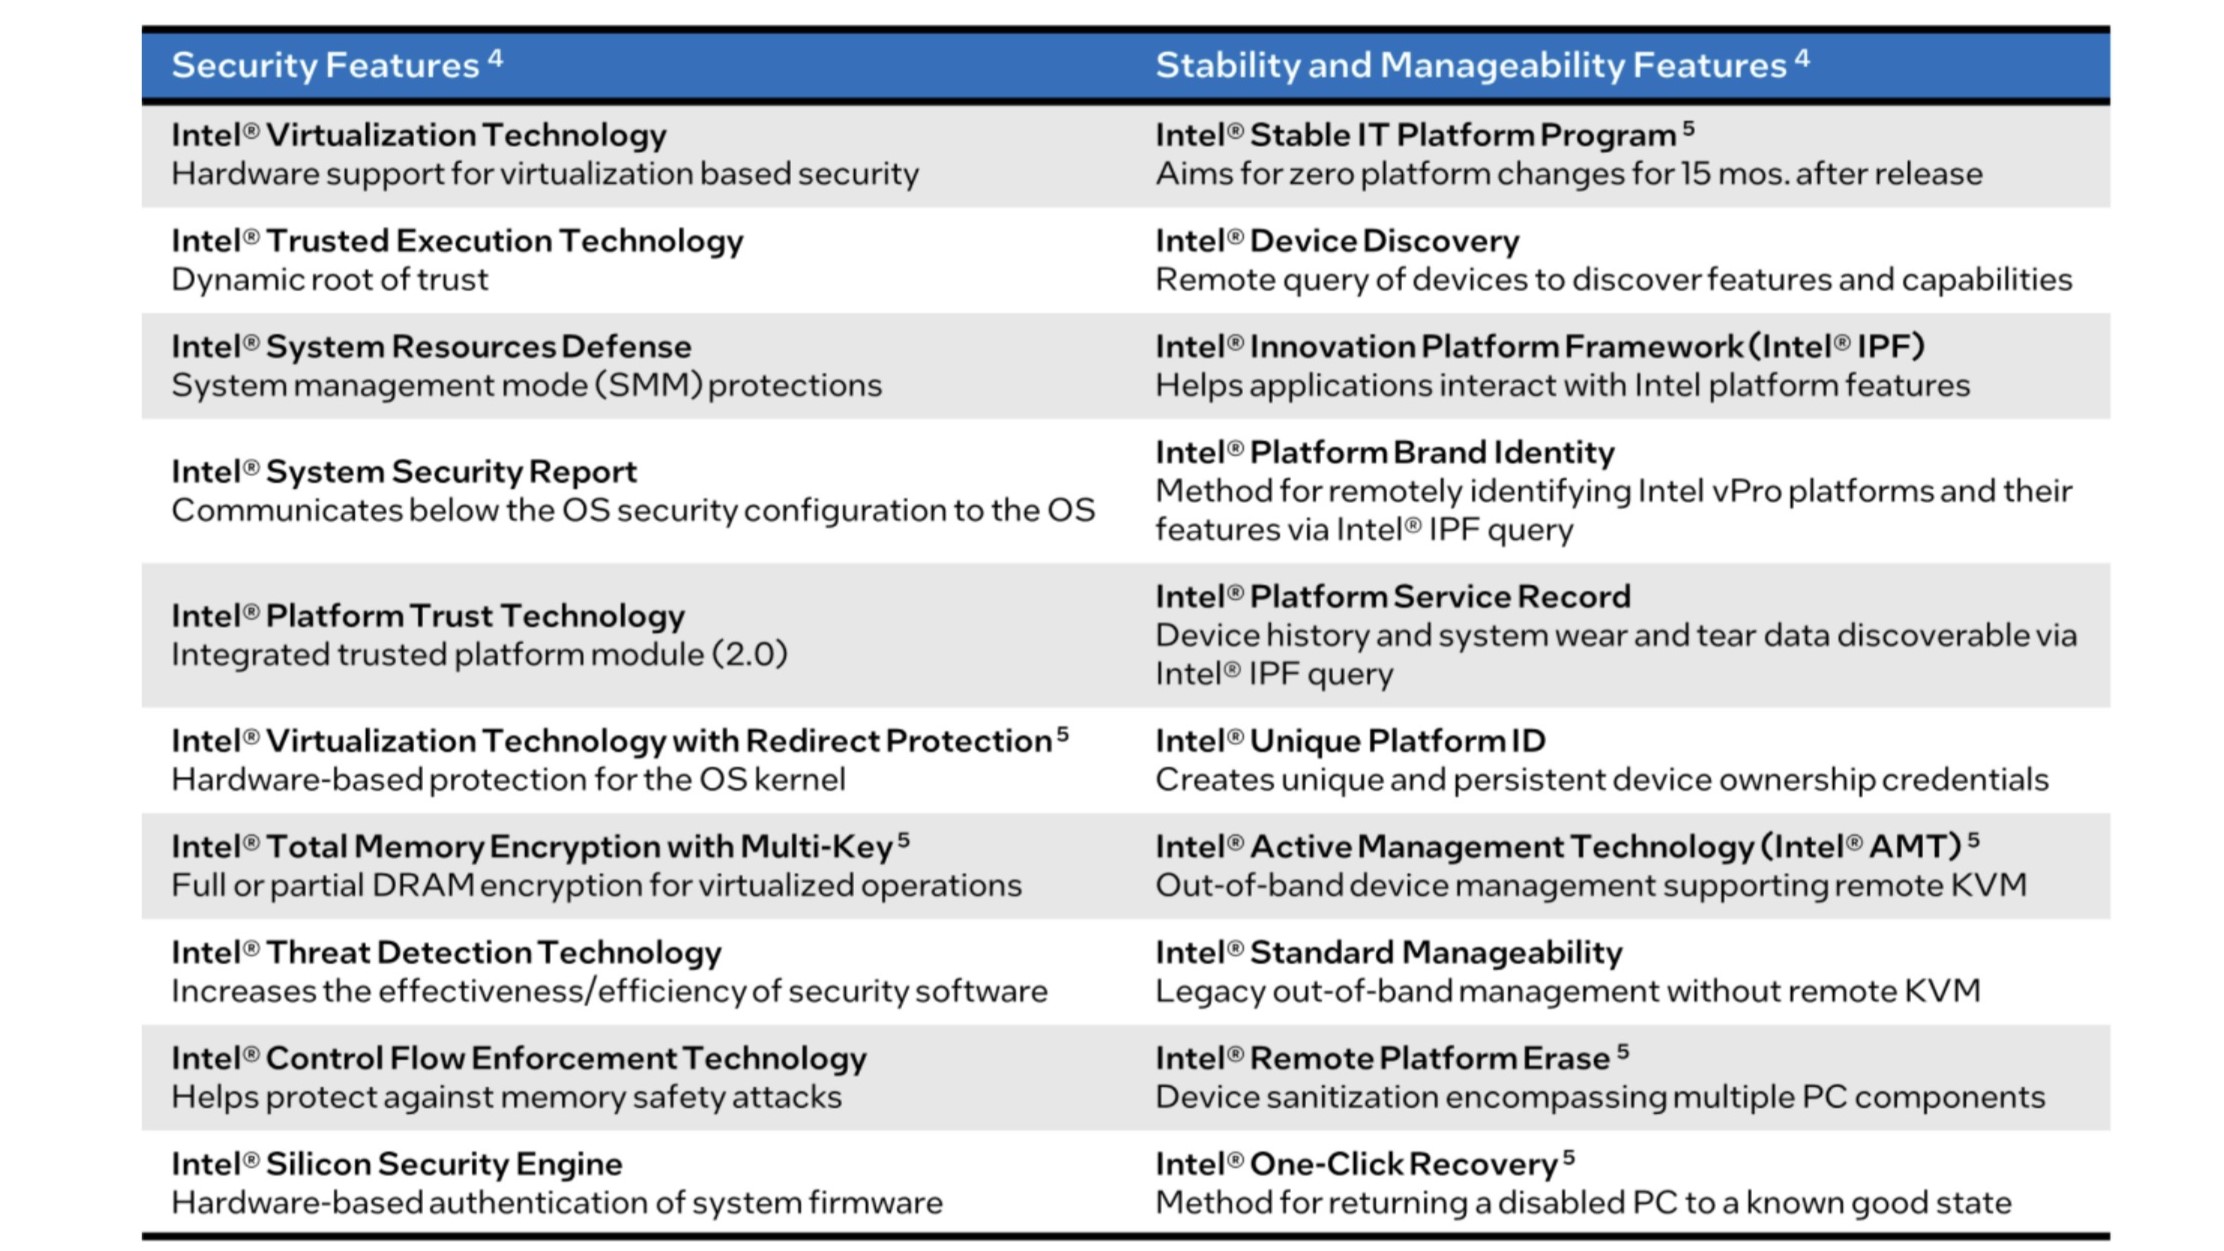 All the Intel vPro features